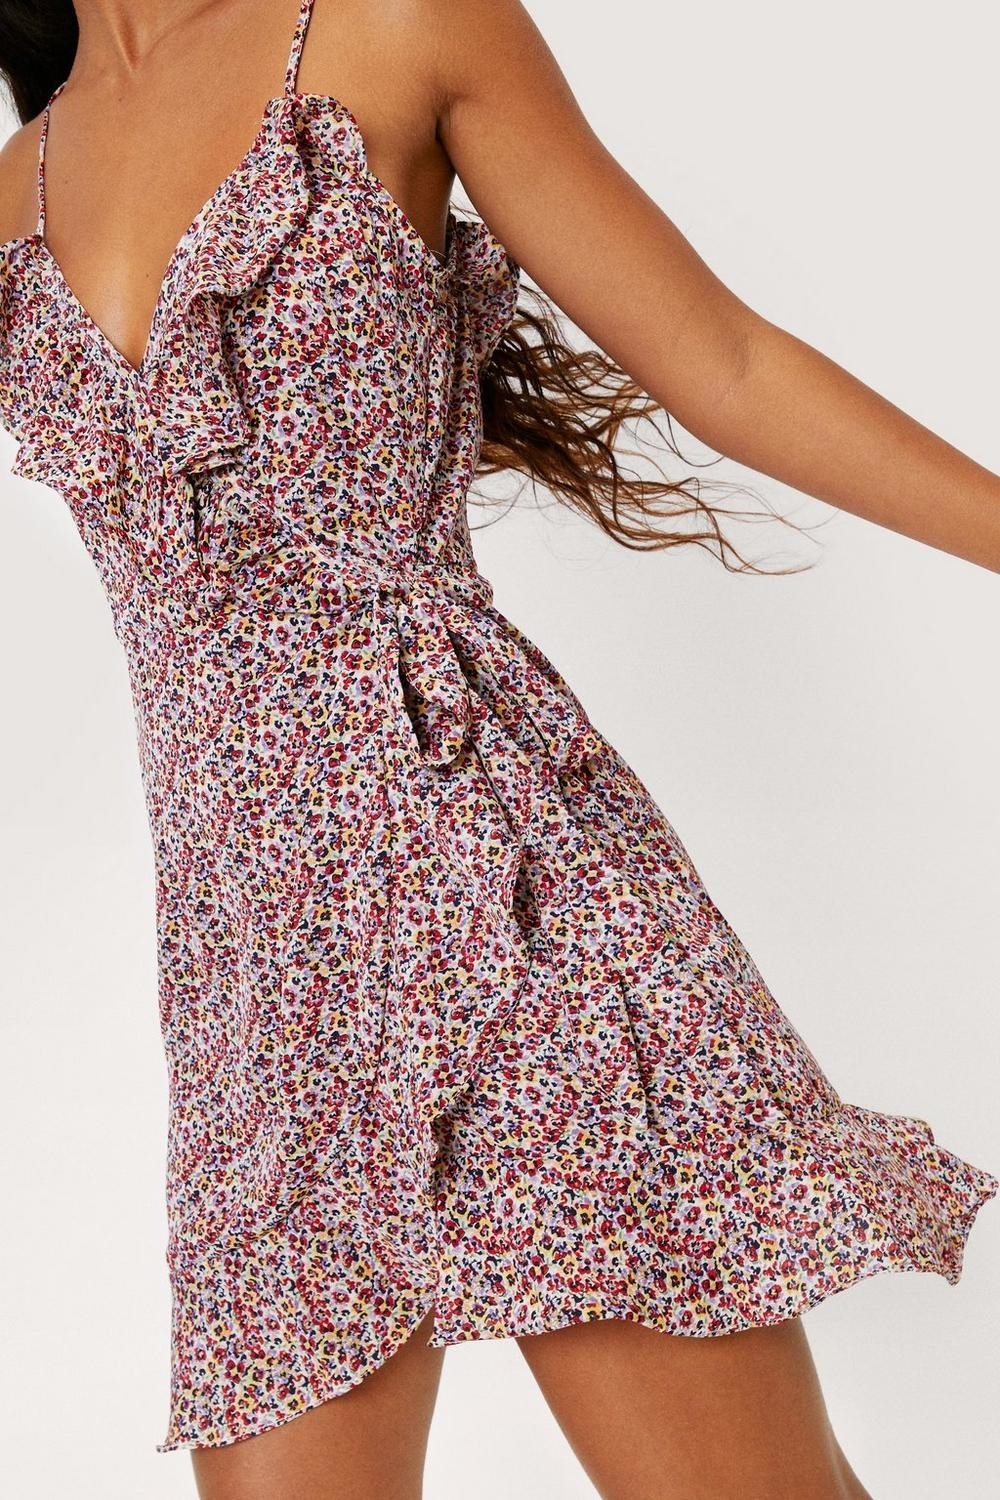 a person wearing the ruffled floral wrap dress